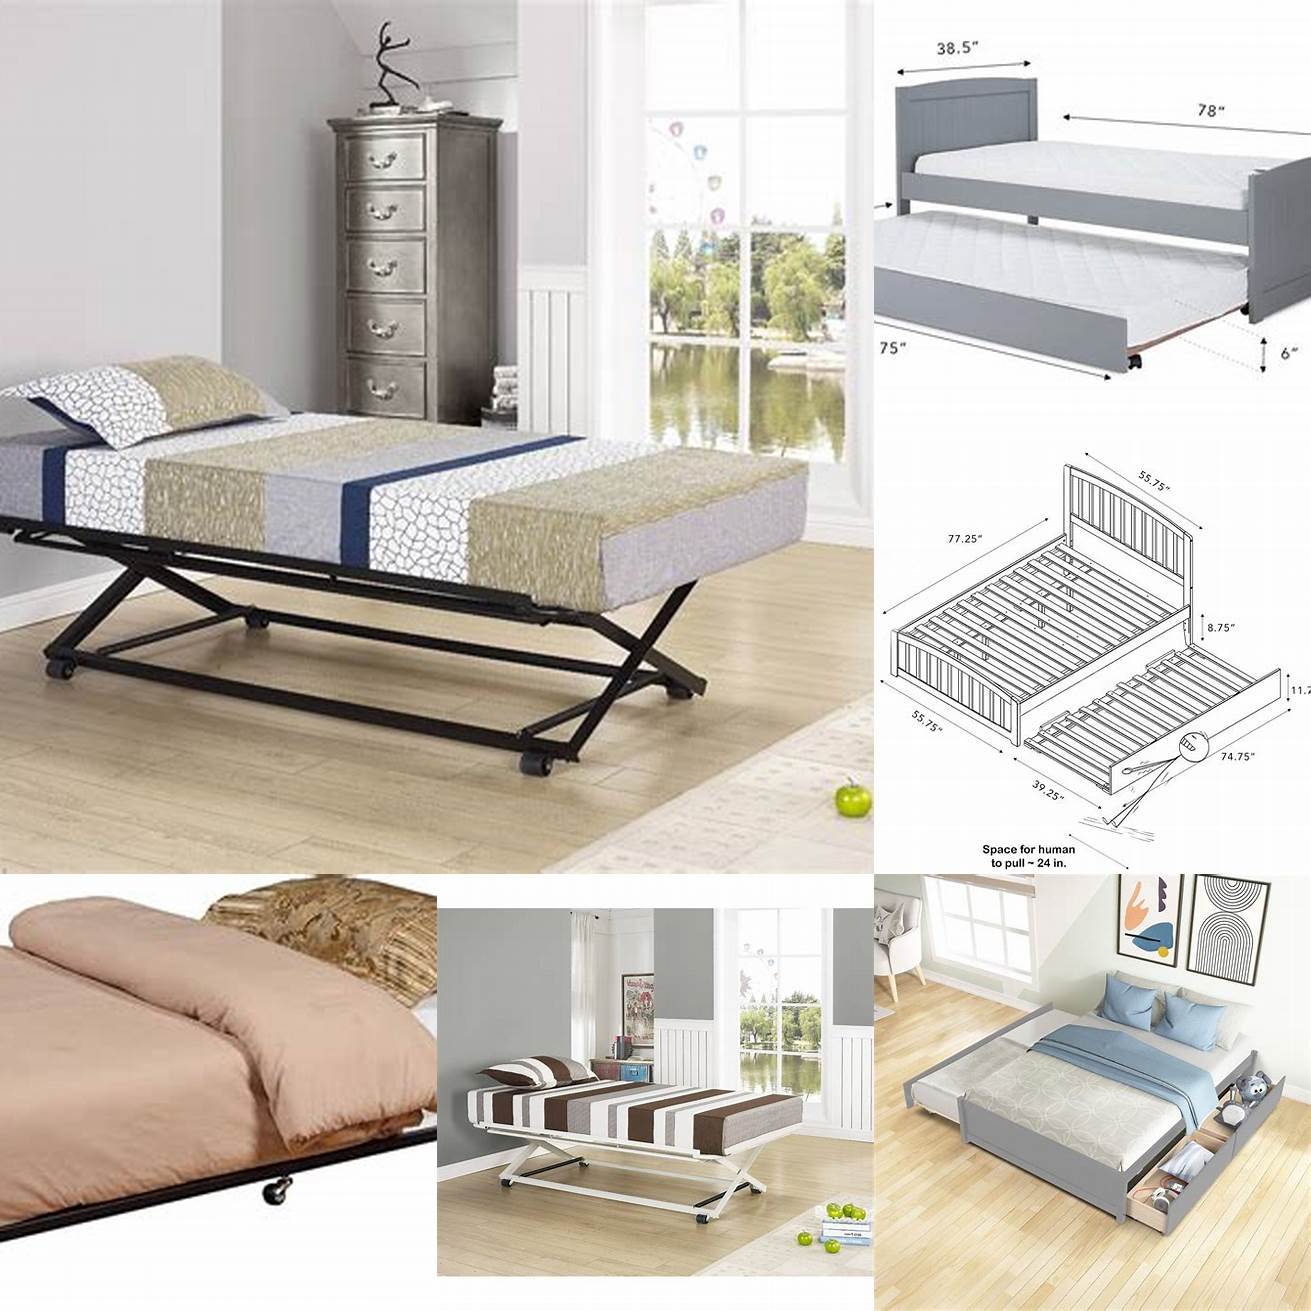 Weight capacity Check the weight capacity of the bed frame and the trundle bed to ensure that they can support your weight or your guests weight